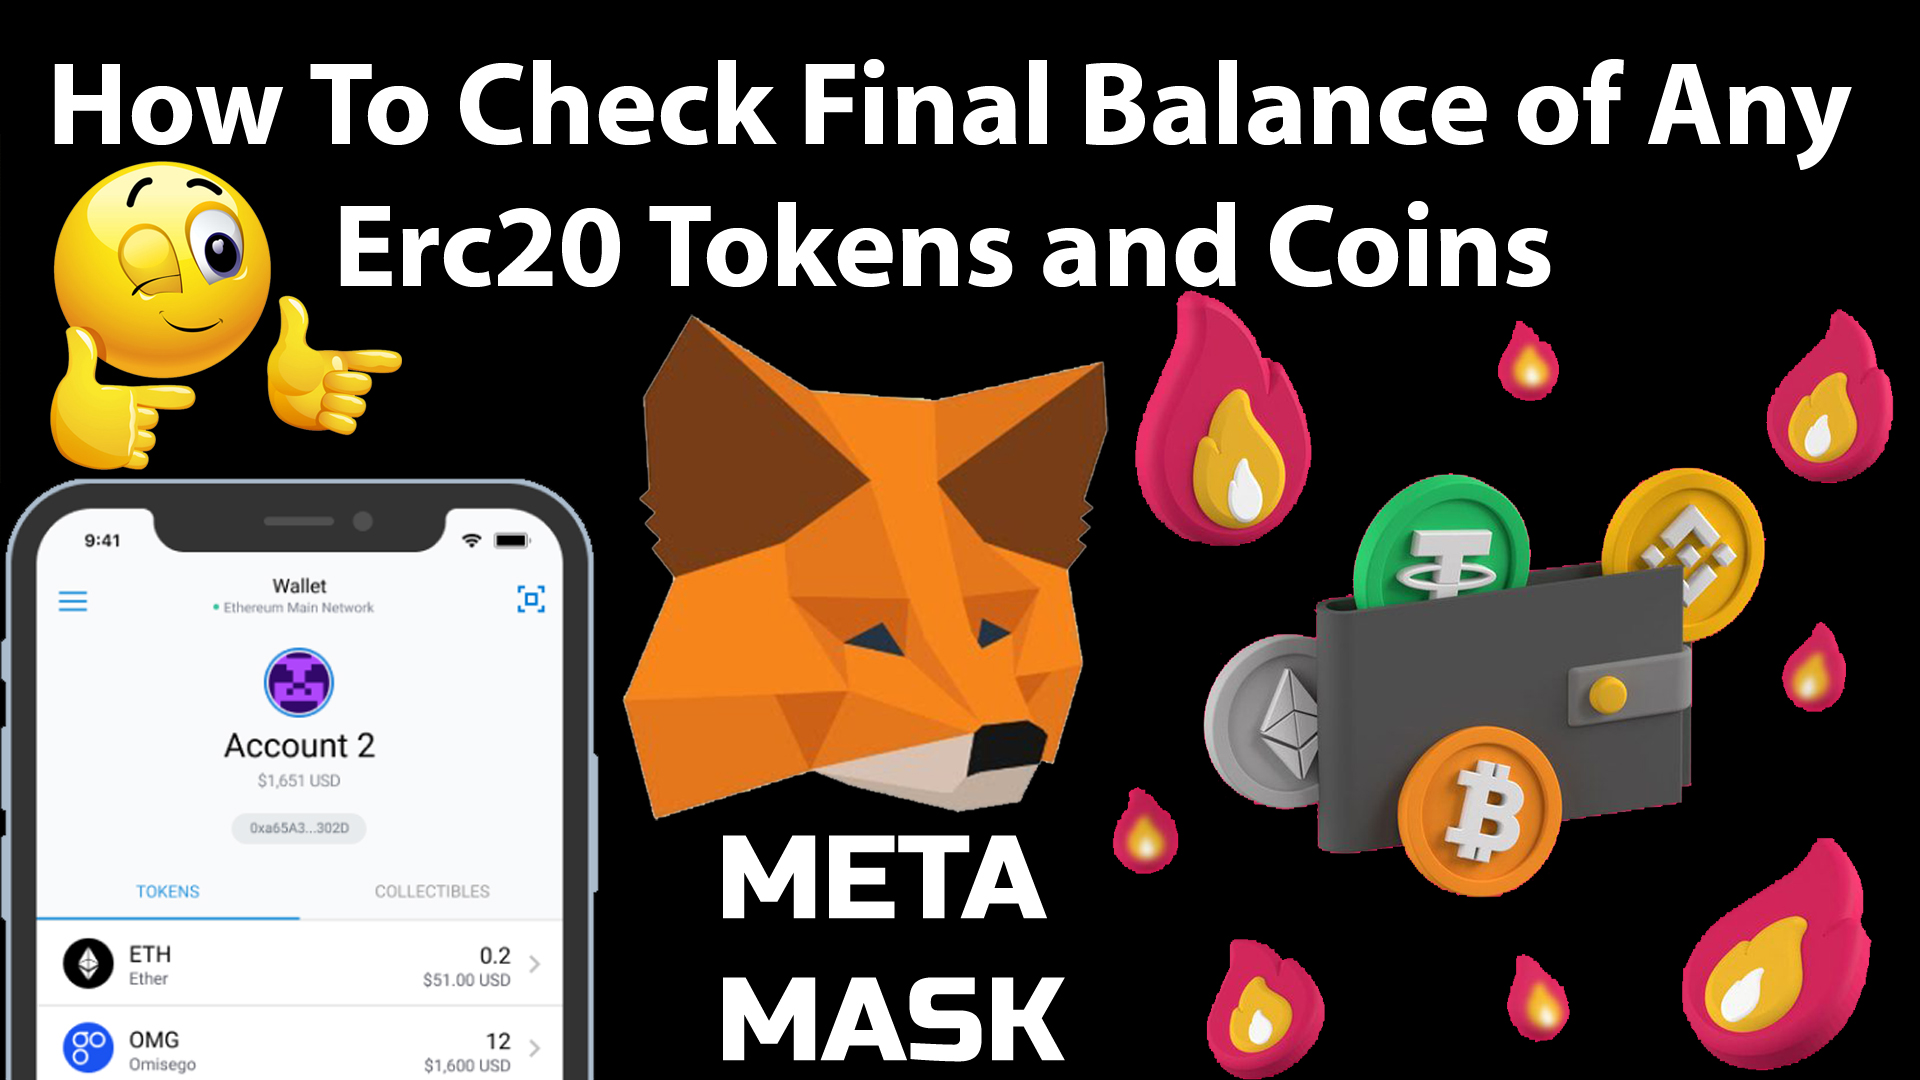 How To Check Final Balance of Any Erc20 Tokens and Coins by Crypto Wallets Info.jpg